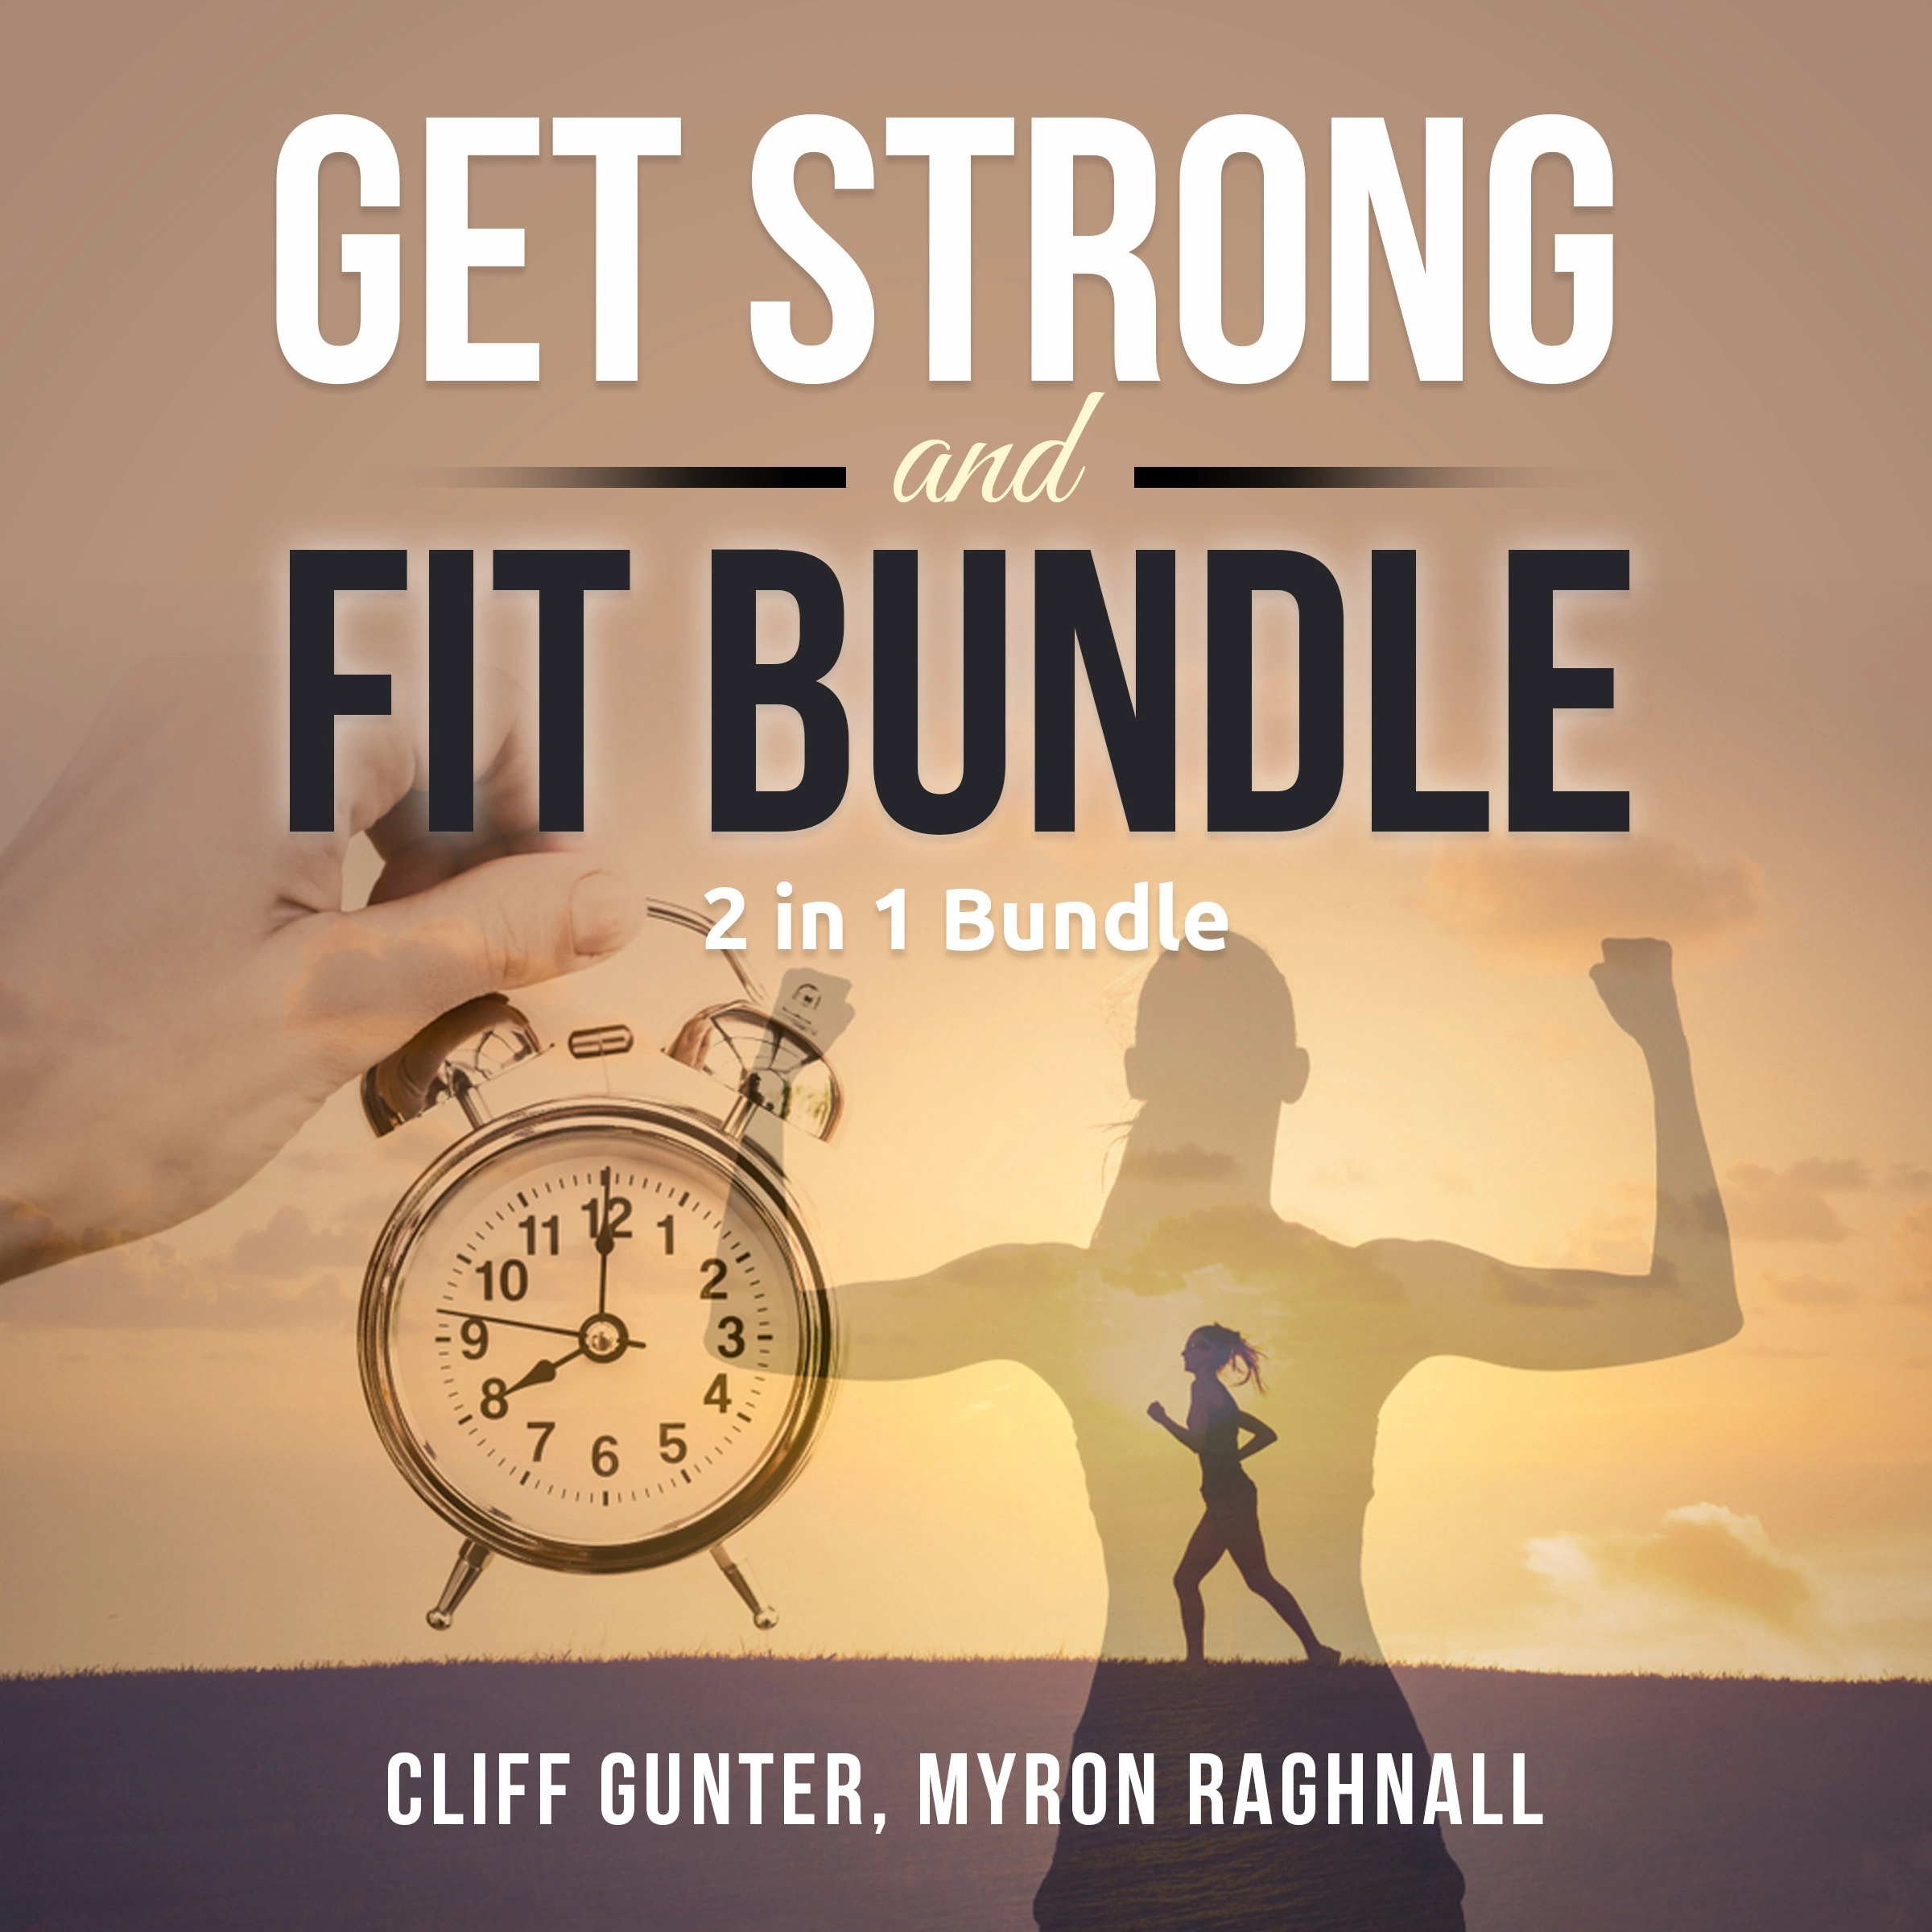 Get Strong and Fit Bundle, 2 in 1 Bundle by Cliff Gunter Audiobook